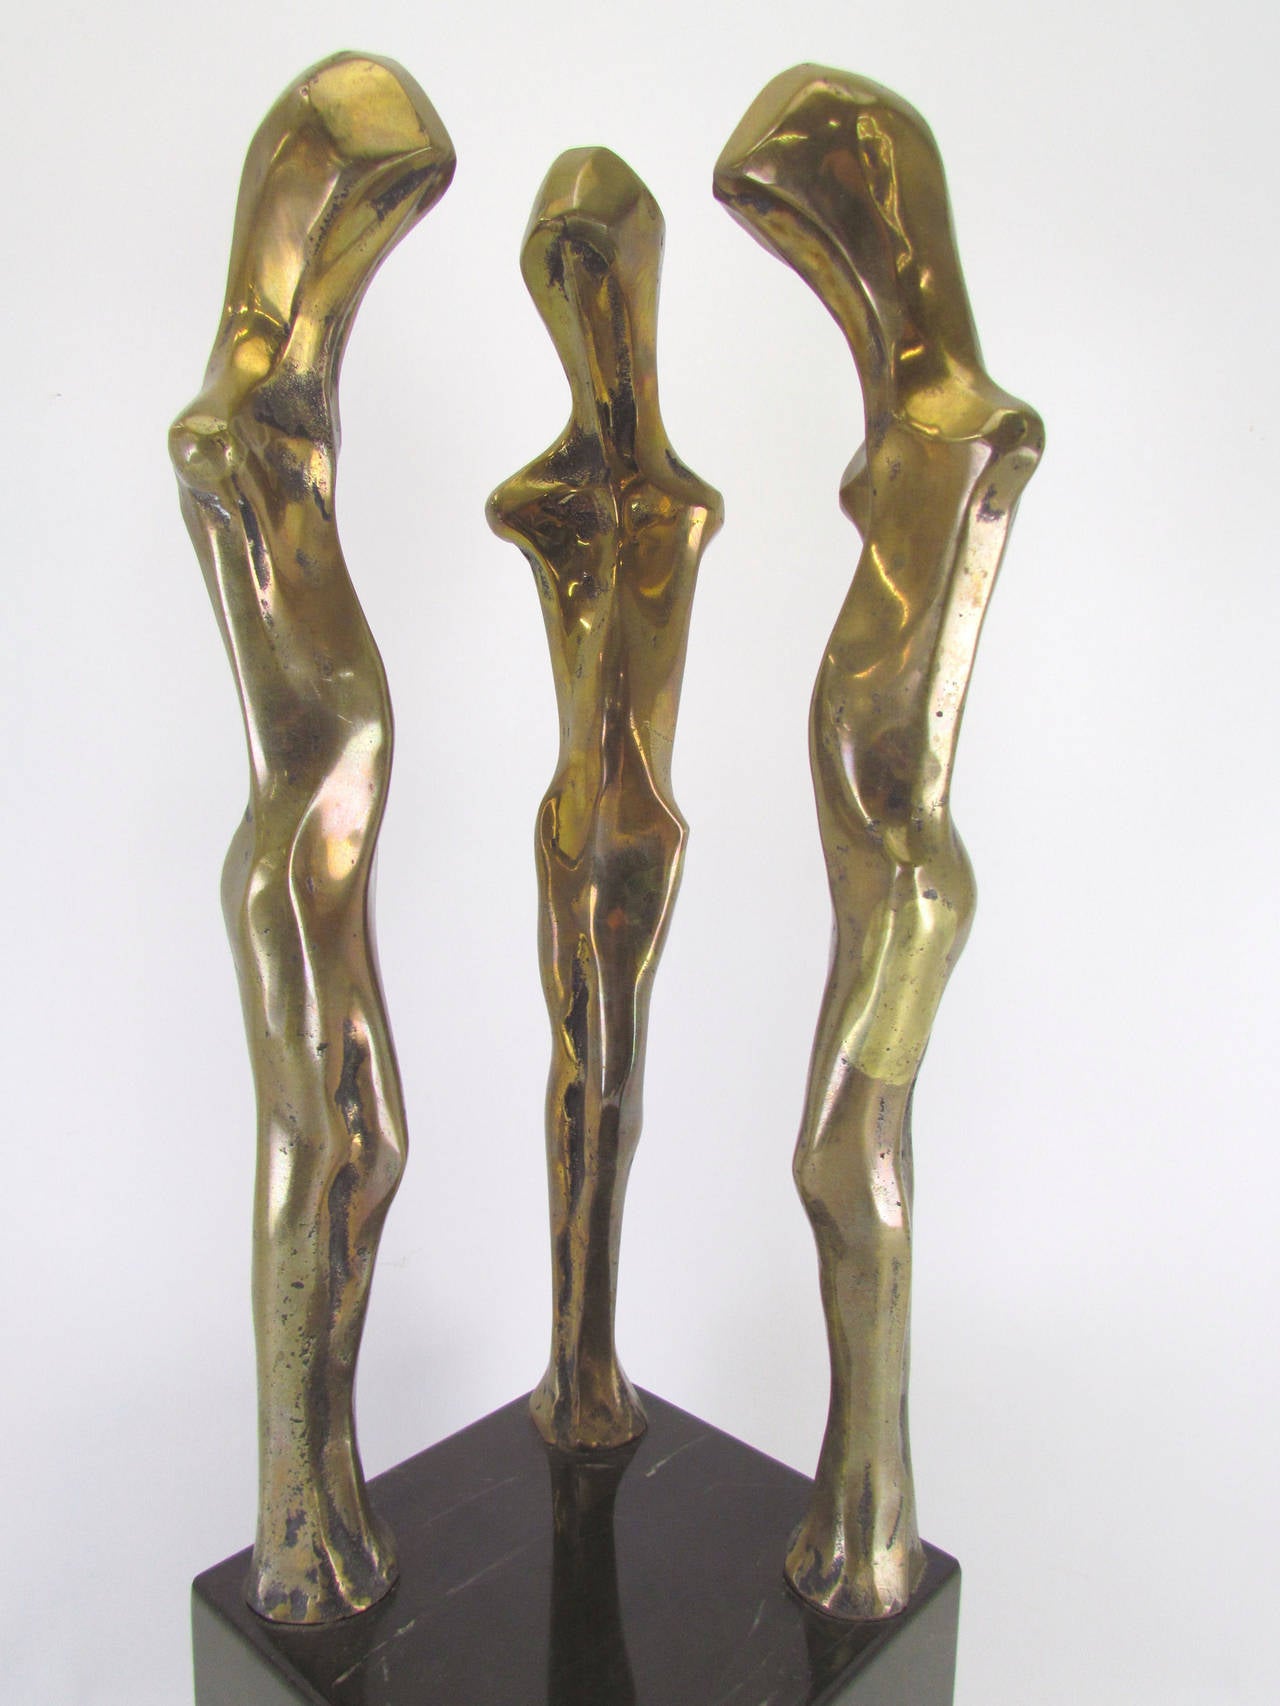 American Abstract Figural Modernist Sculpture in Bronze and Marble, Signed Davidson